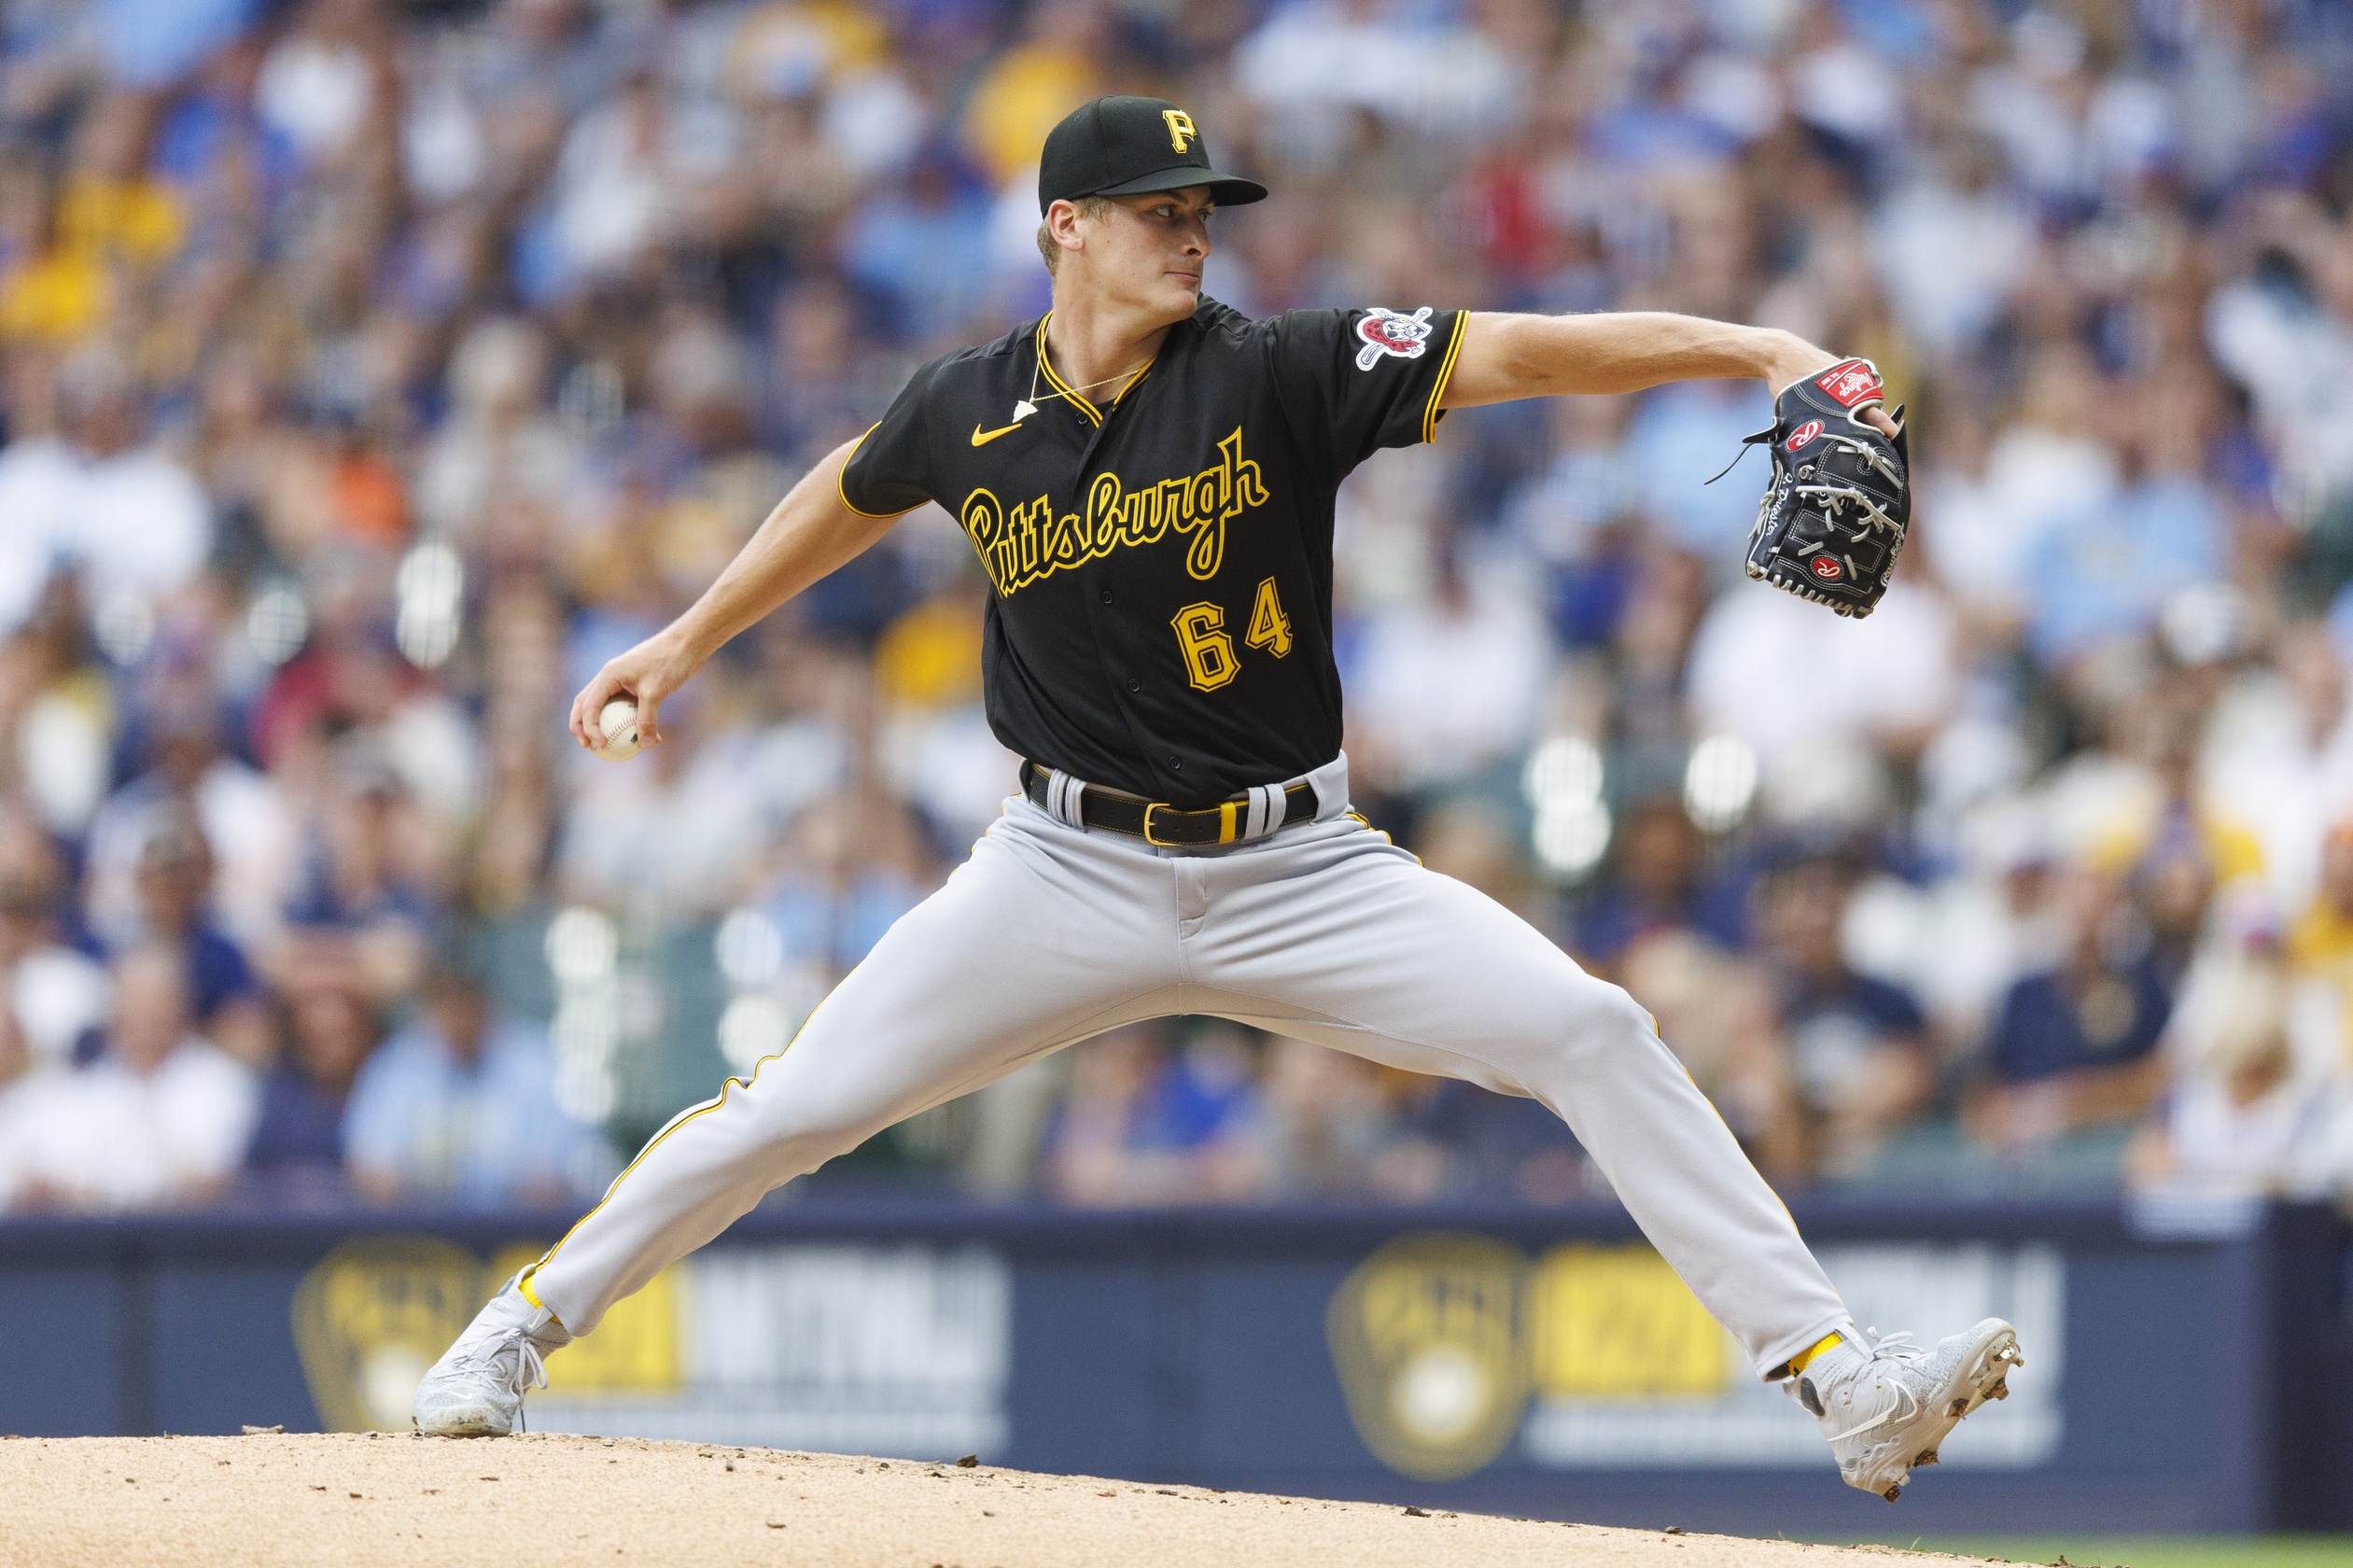 It's official: Pirates call up top prospect Glasnow